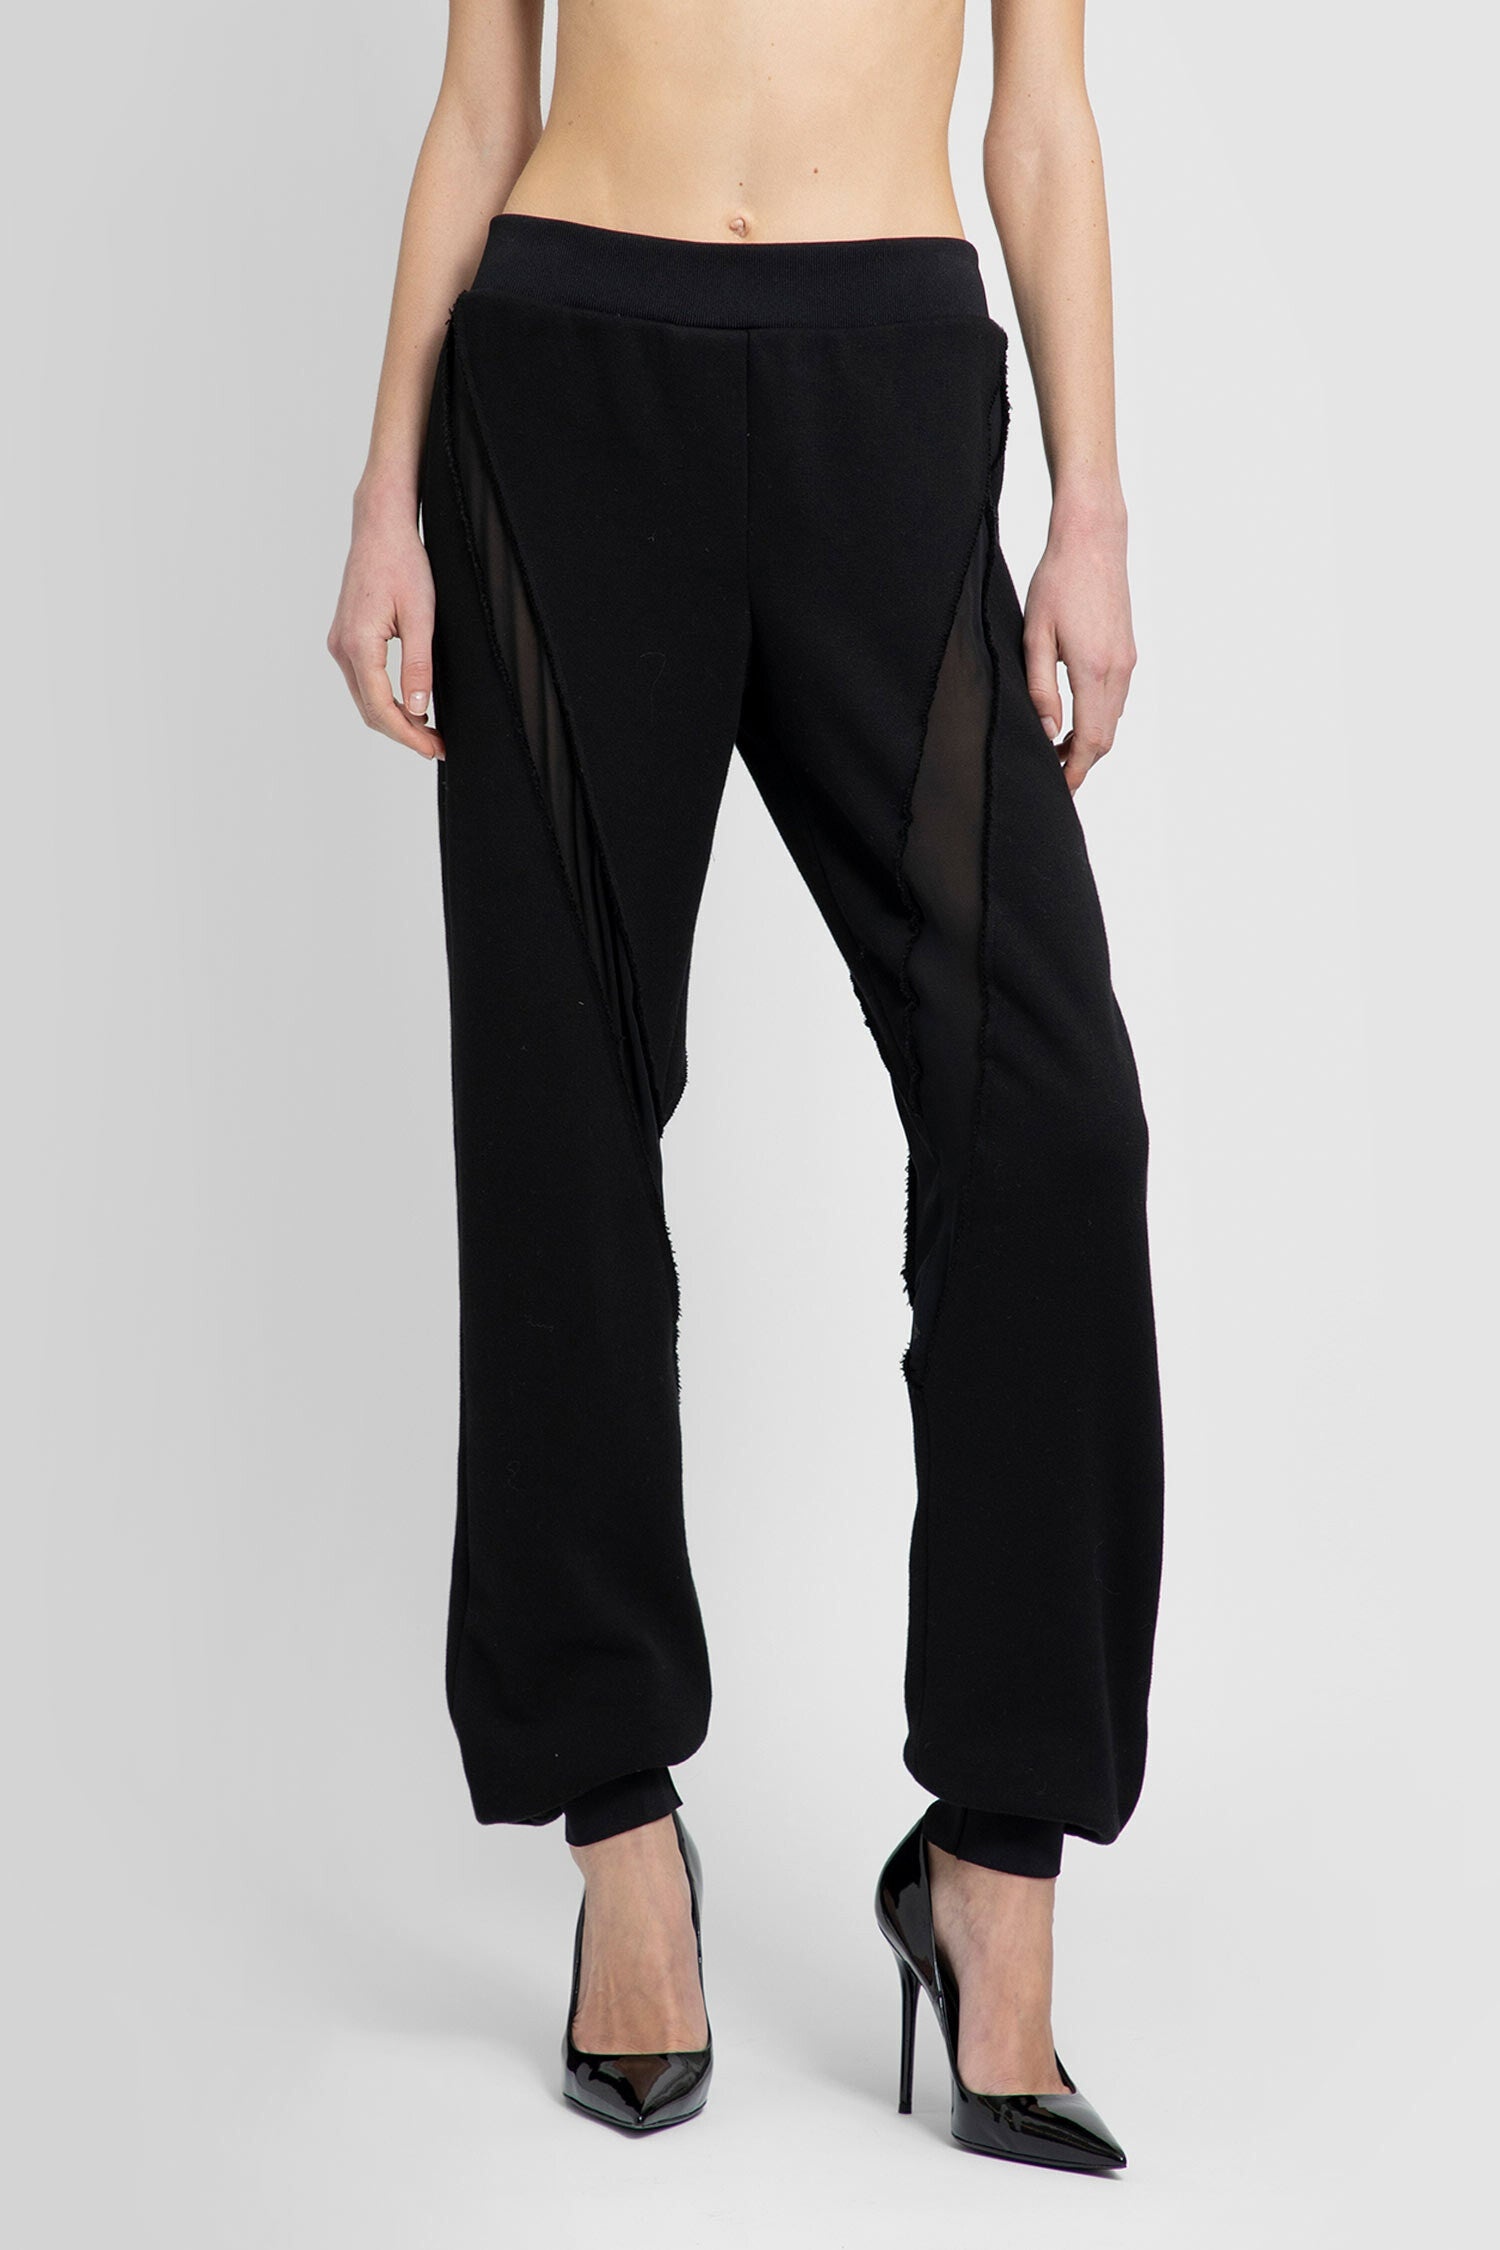 TOM FORD WOMAN BLACK TROUSERS - 1